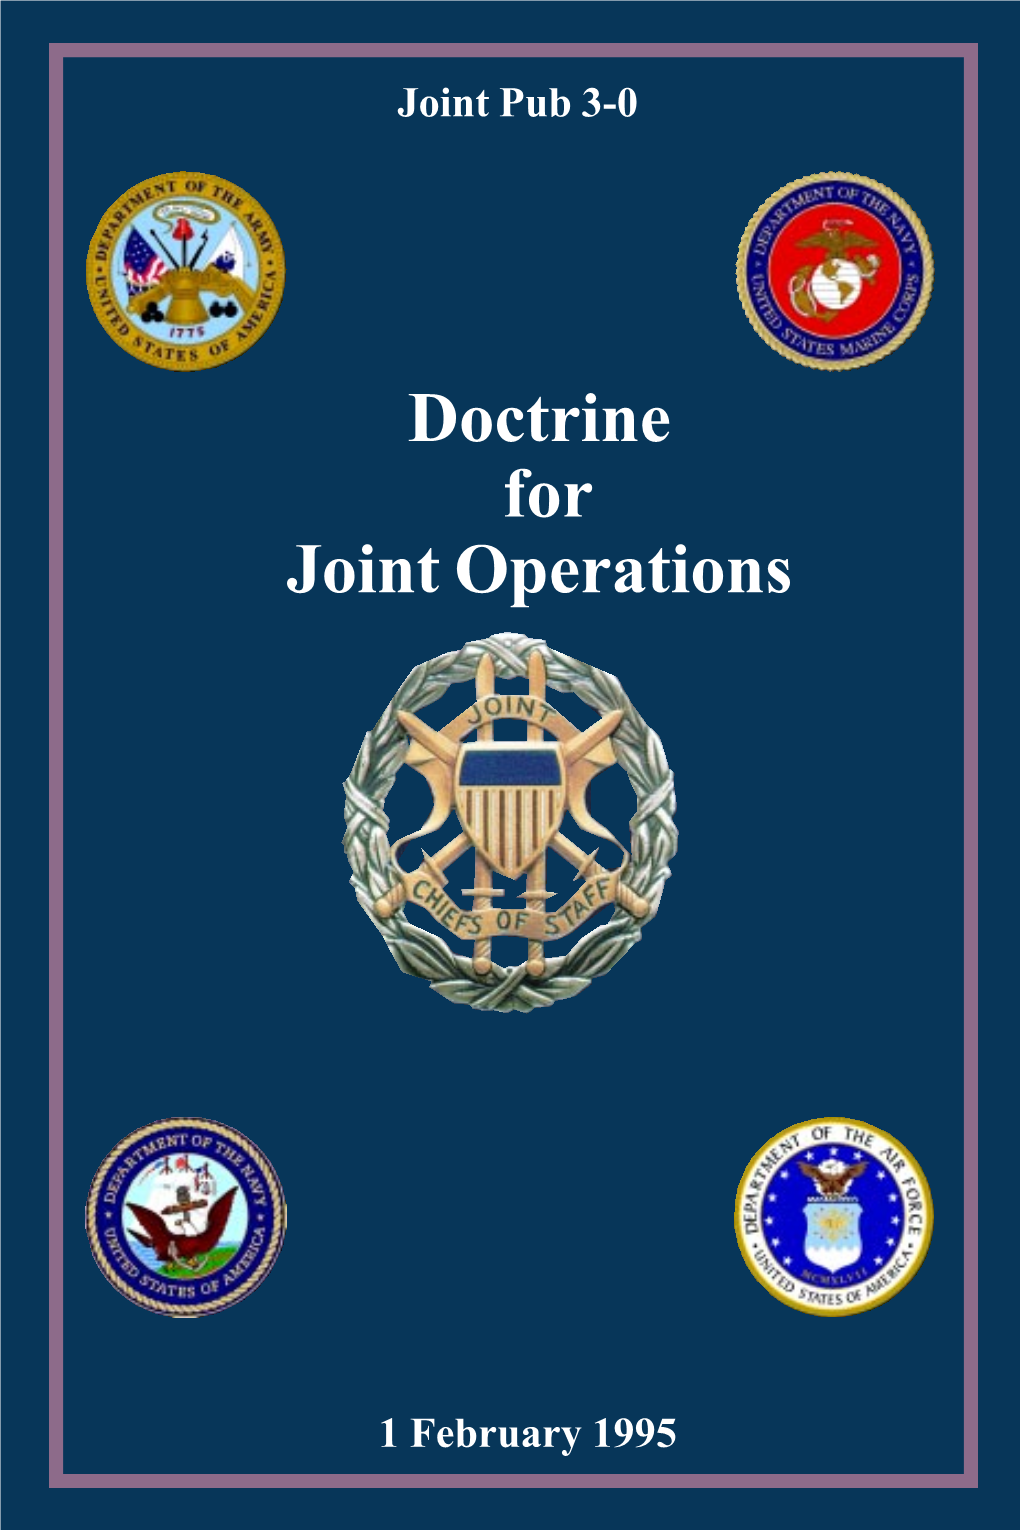 JP 3-0 Doctrine for Joint Operations